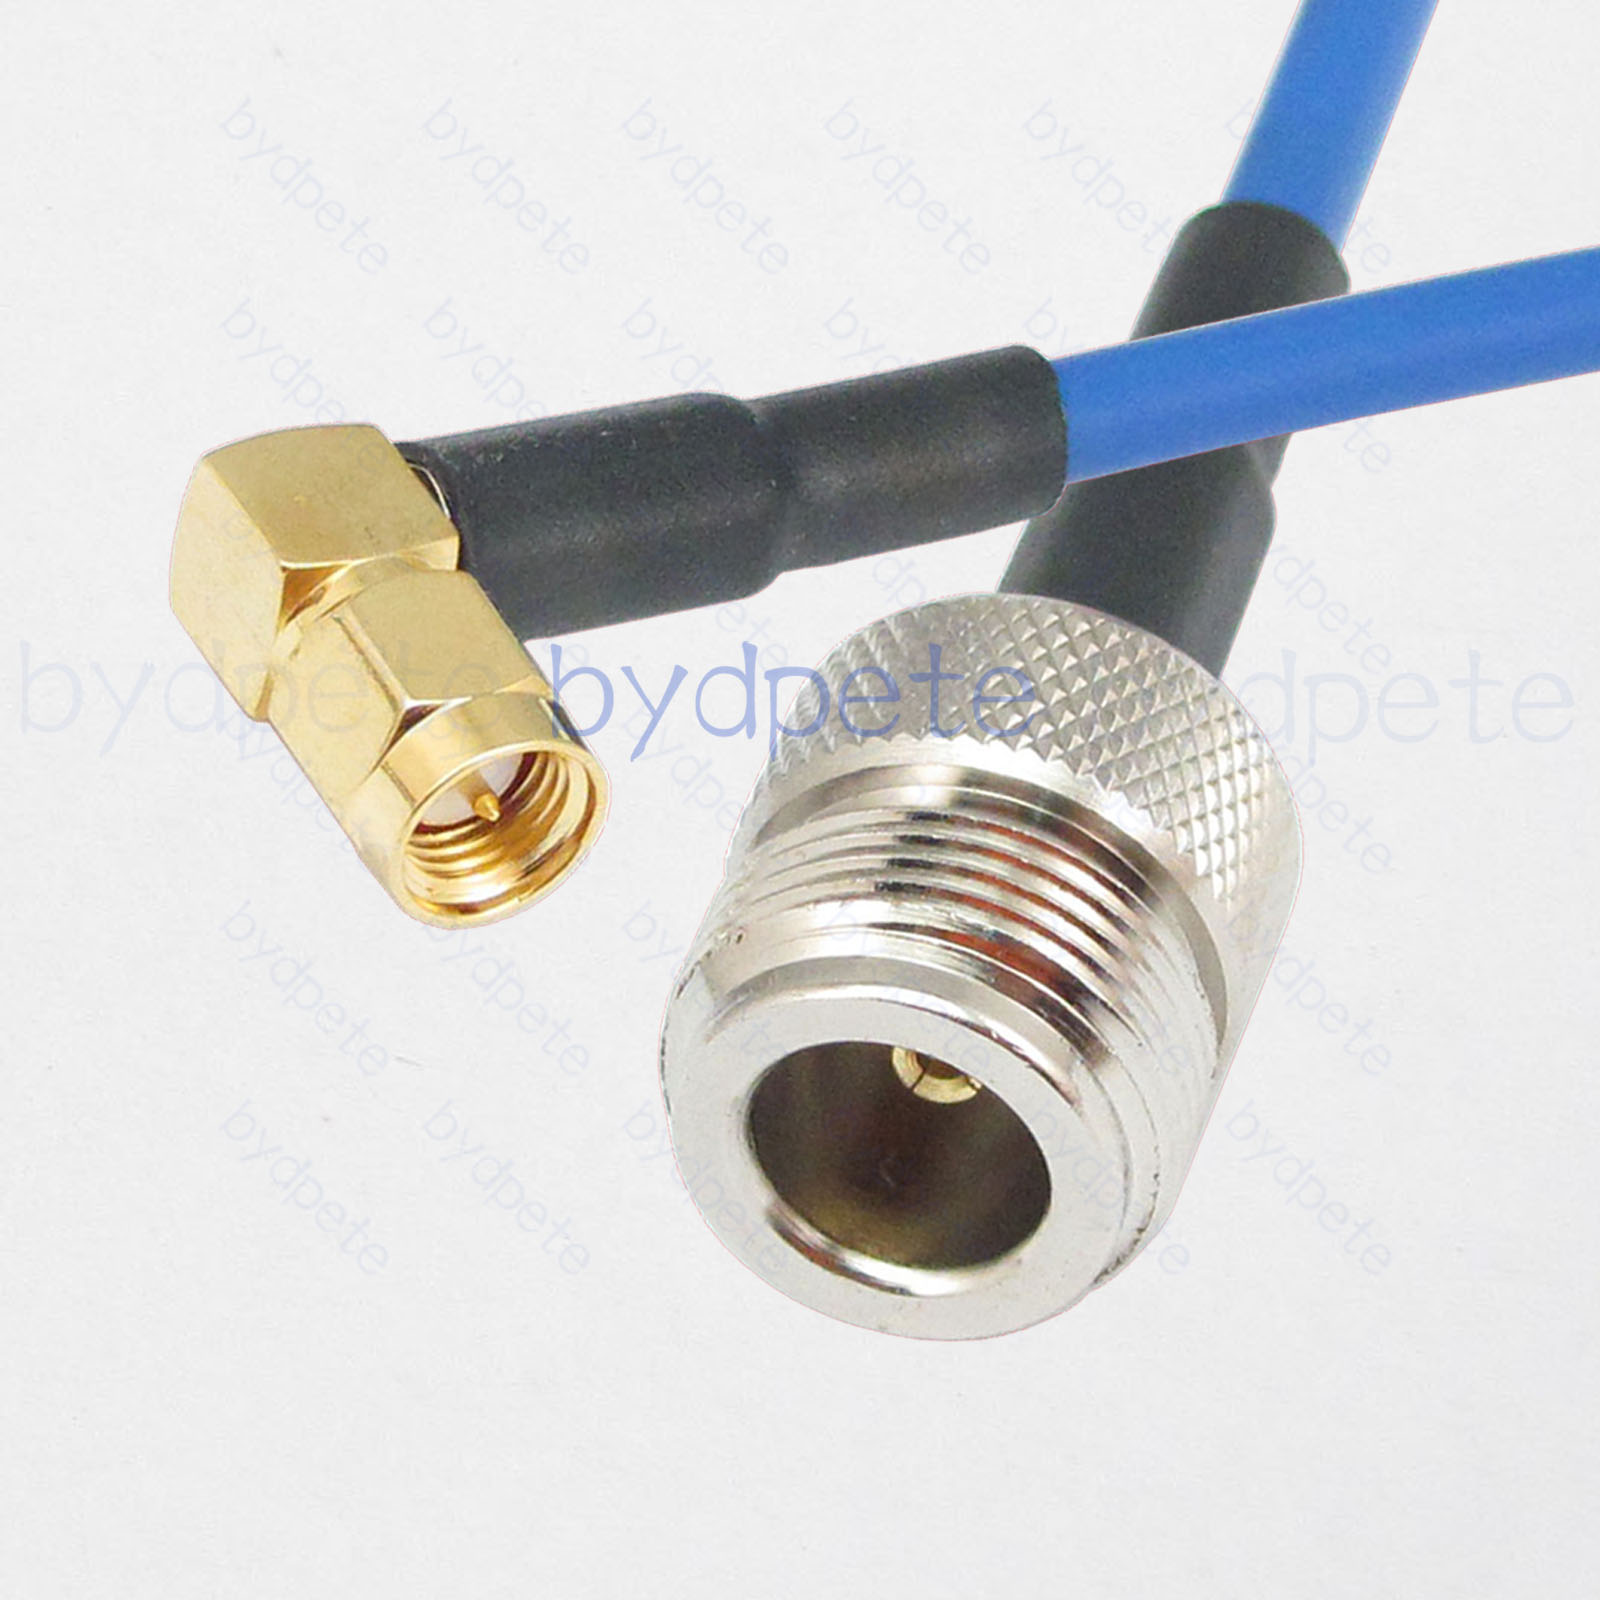 N-Type female jack to SMA male plug right angle RG402 RG141 Semi Flexible Rigid Low Loss Cable Coaxial Kable 50ohm BYDC025N402R2 N-RG402